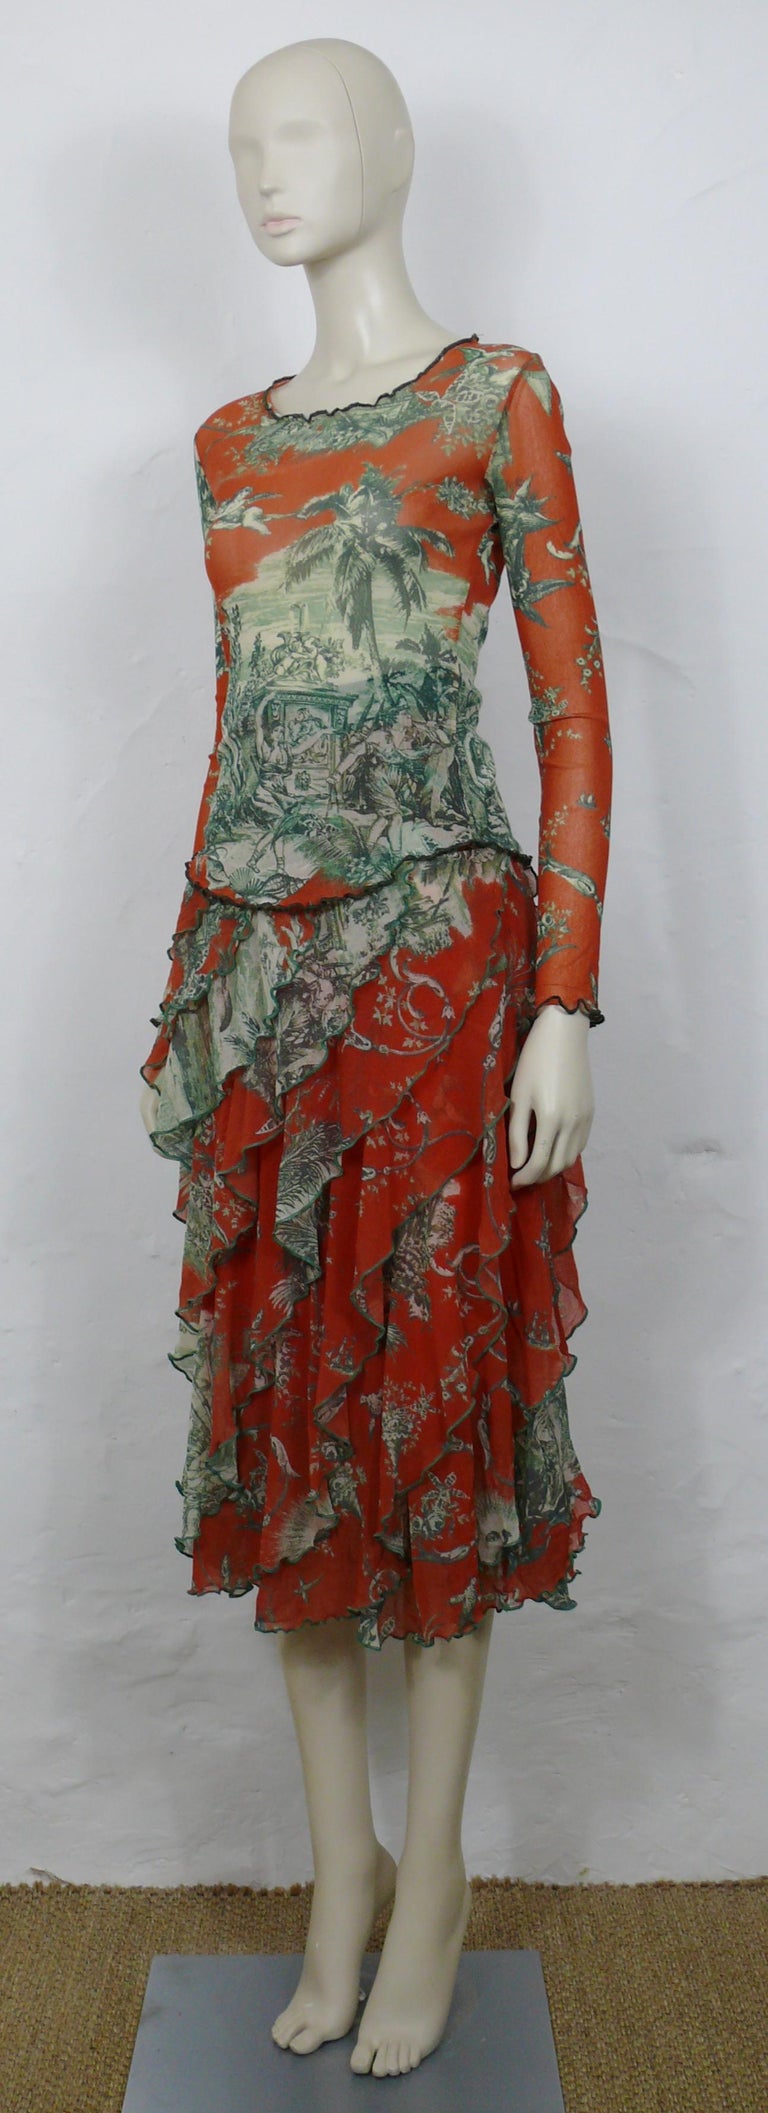 Jean Paul Gaultier Vintage Mesh Toile de Jouy Print Top and Skirt Ensemble In Good Condition For Sale In Nice, FR